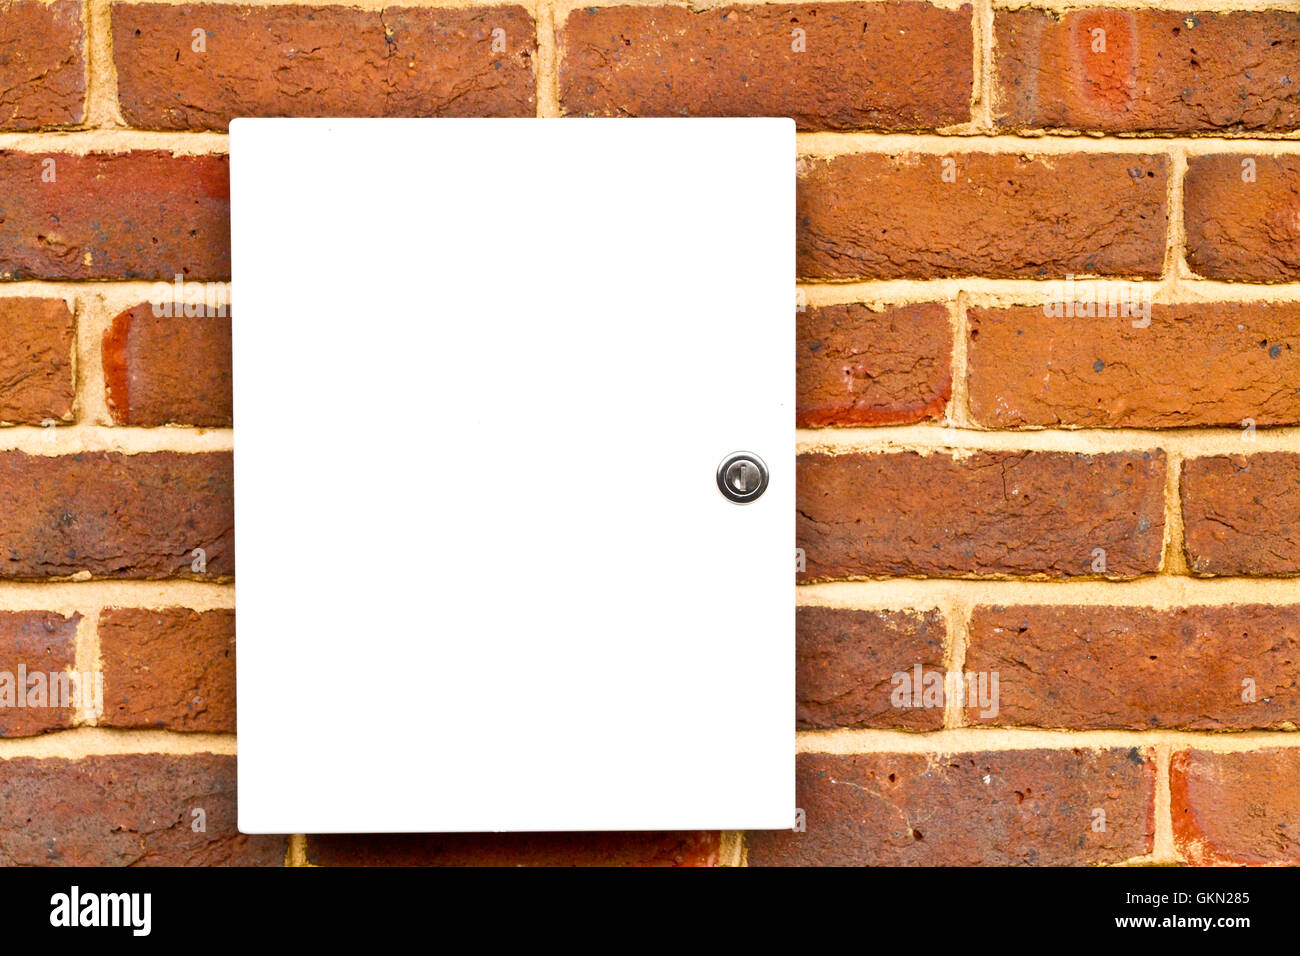 Closed locked white cupboard on a brick wall Stock Photo